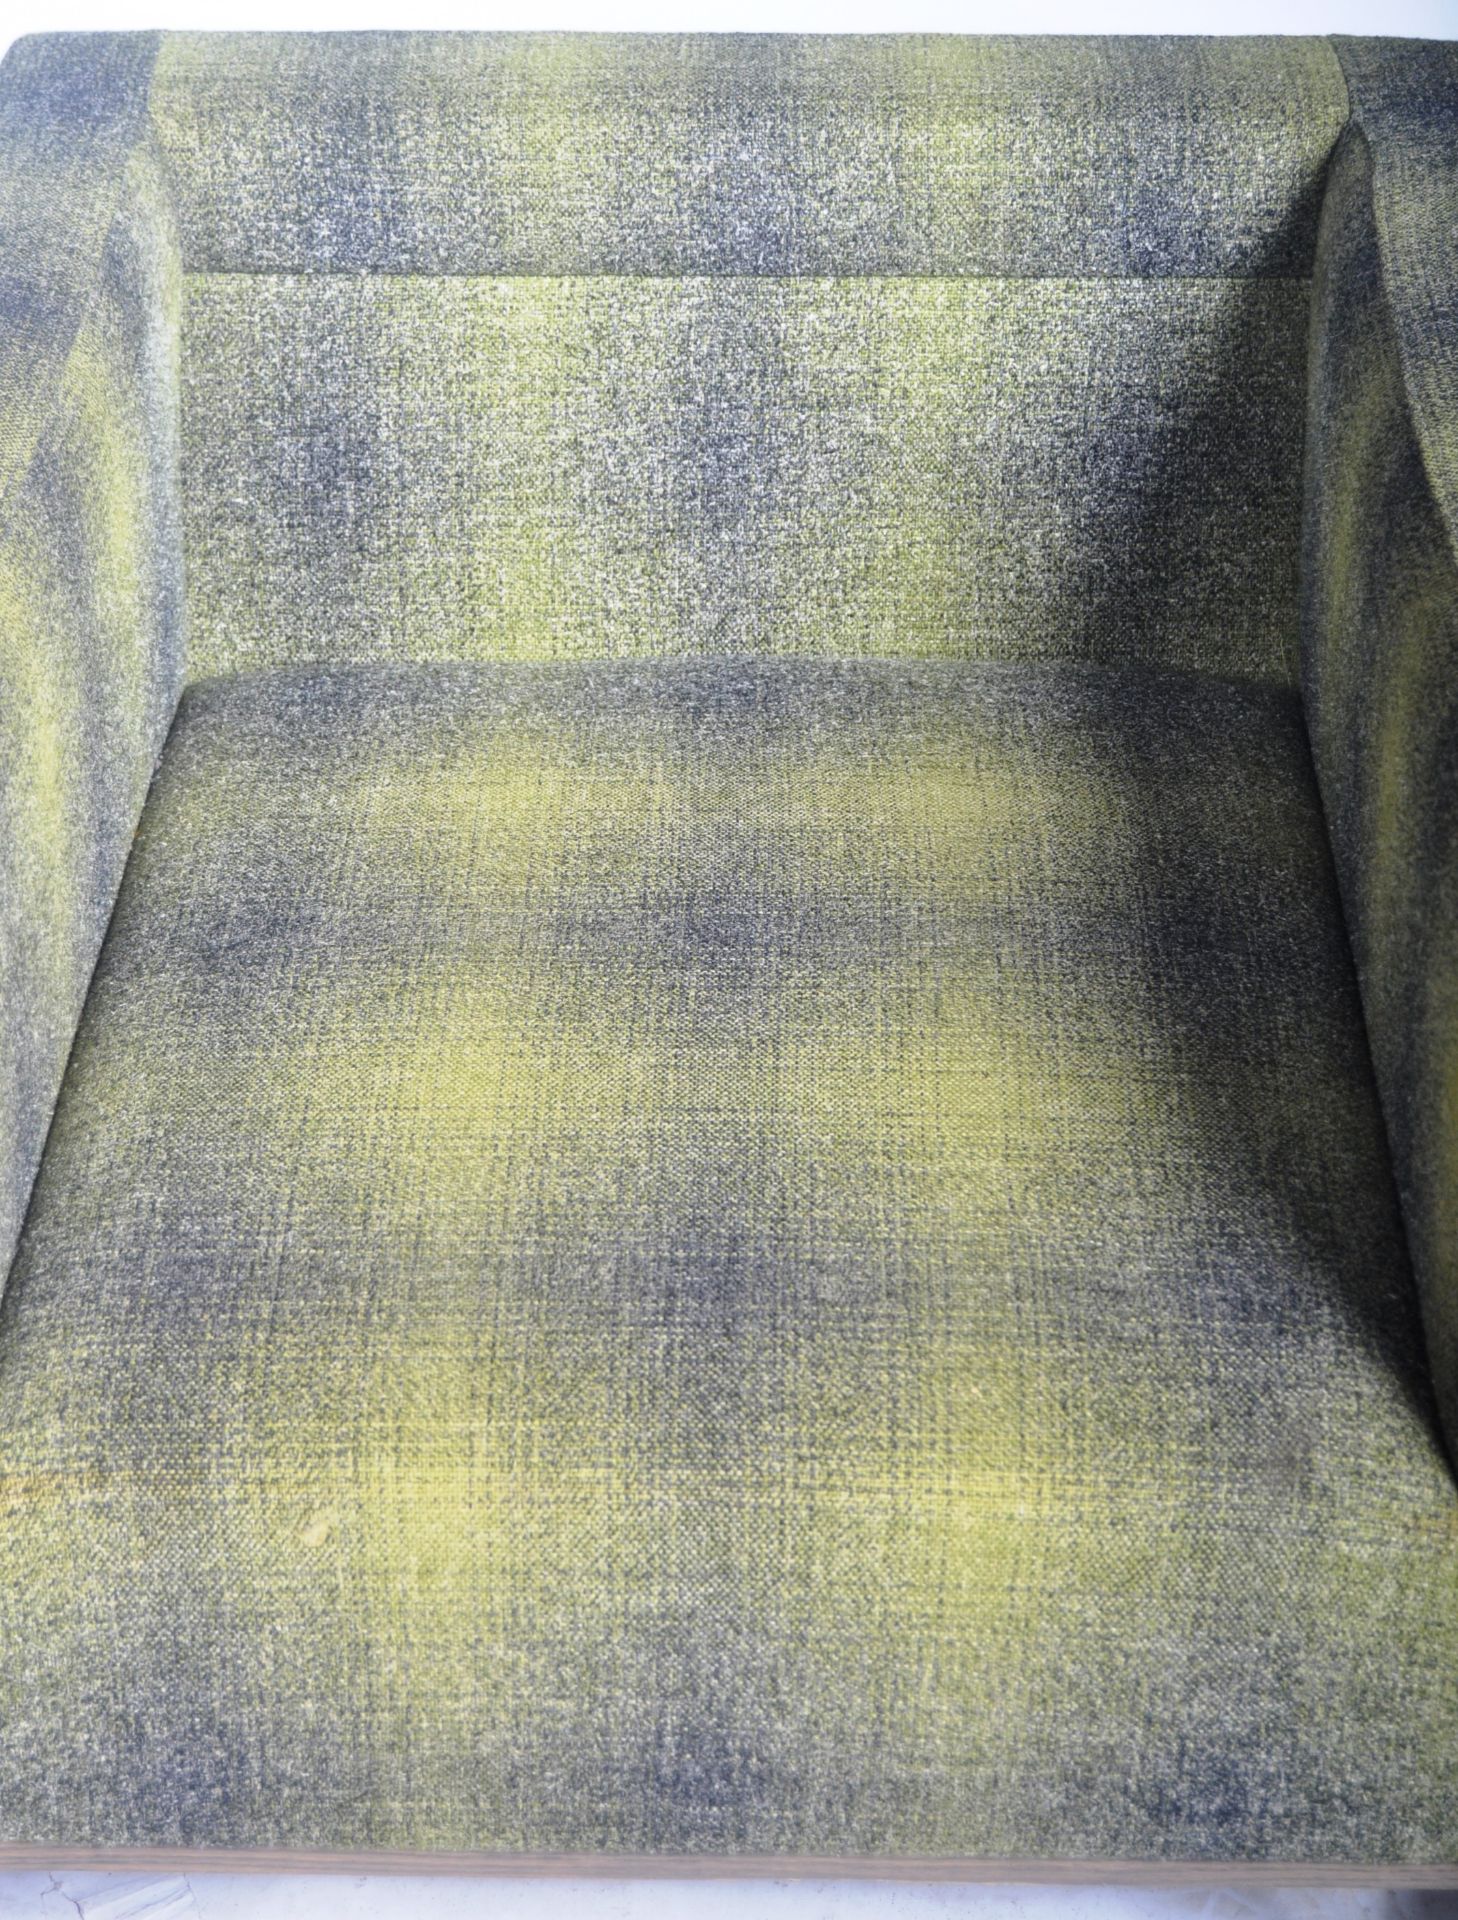 LYNDON DESIGN - ORTEN ARMCHAIR / LOUNGE CHAIR UPHOLSTERED IN GREEN AND GREY - Image 2 of 5